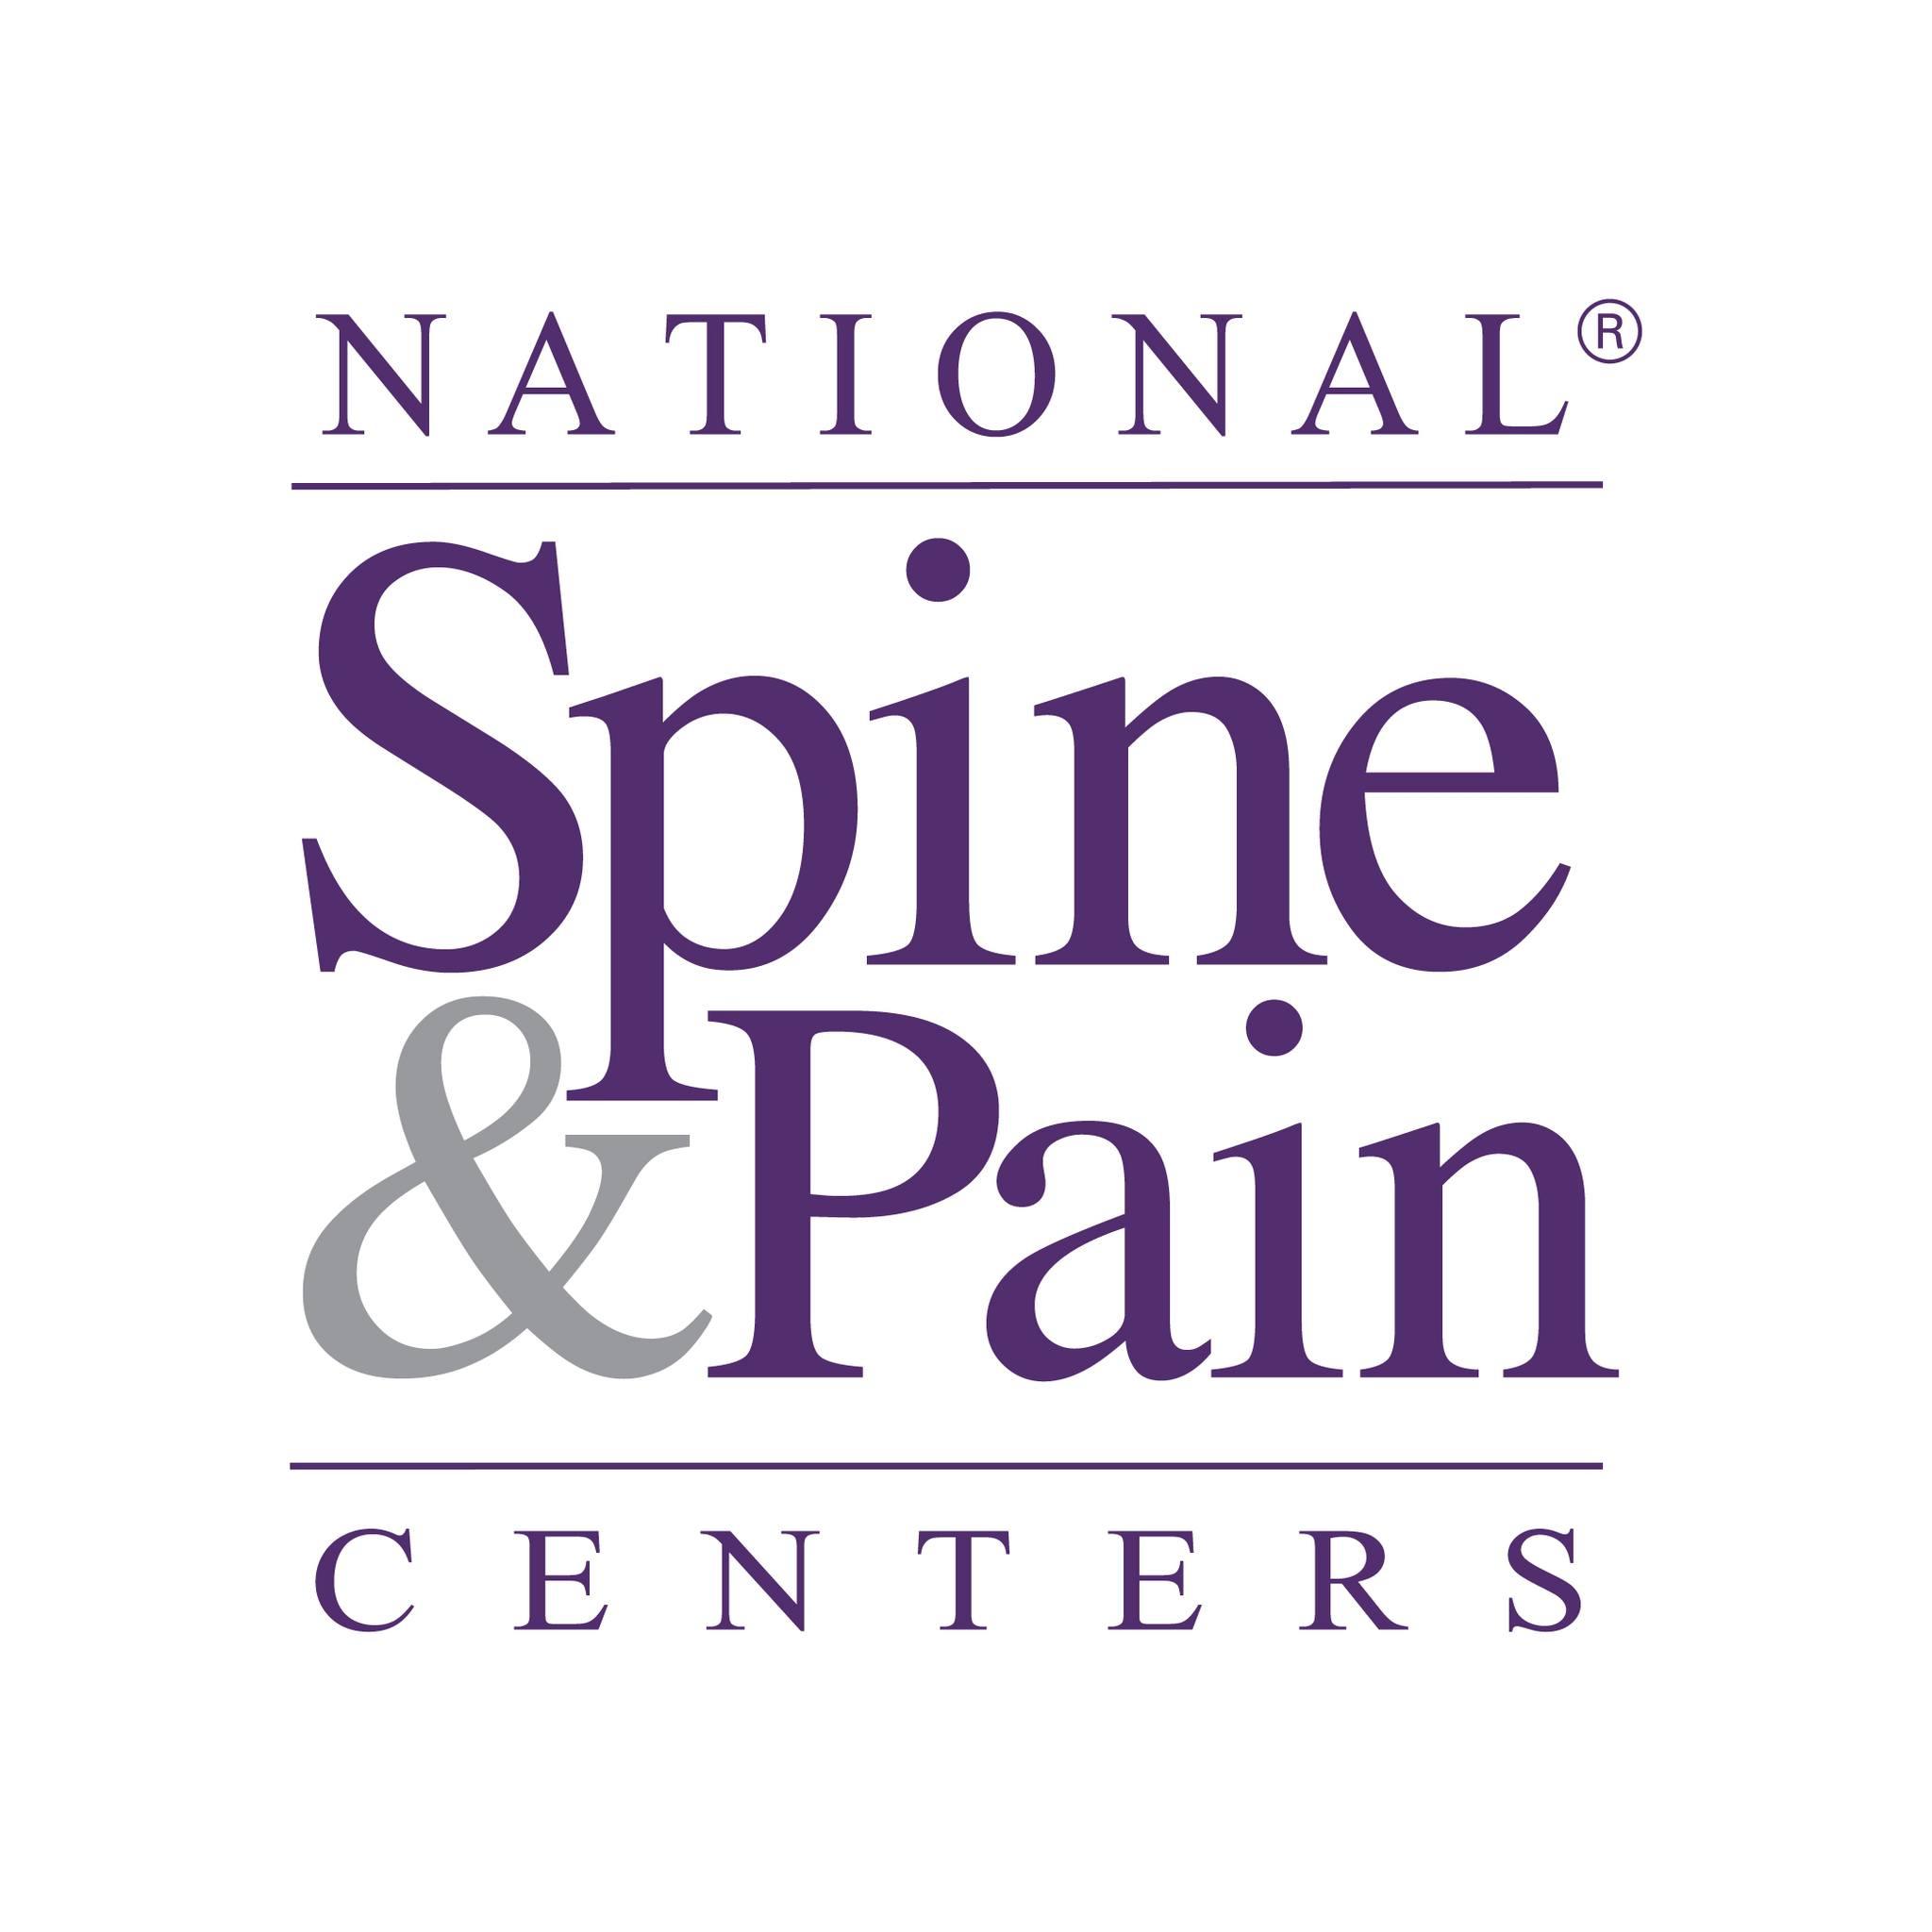 National Spine & Pain Centers - Bowie Bowie (301)464-7008